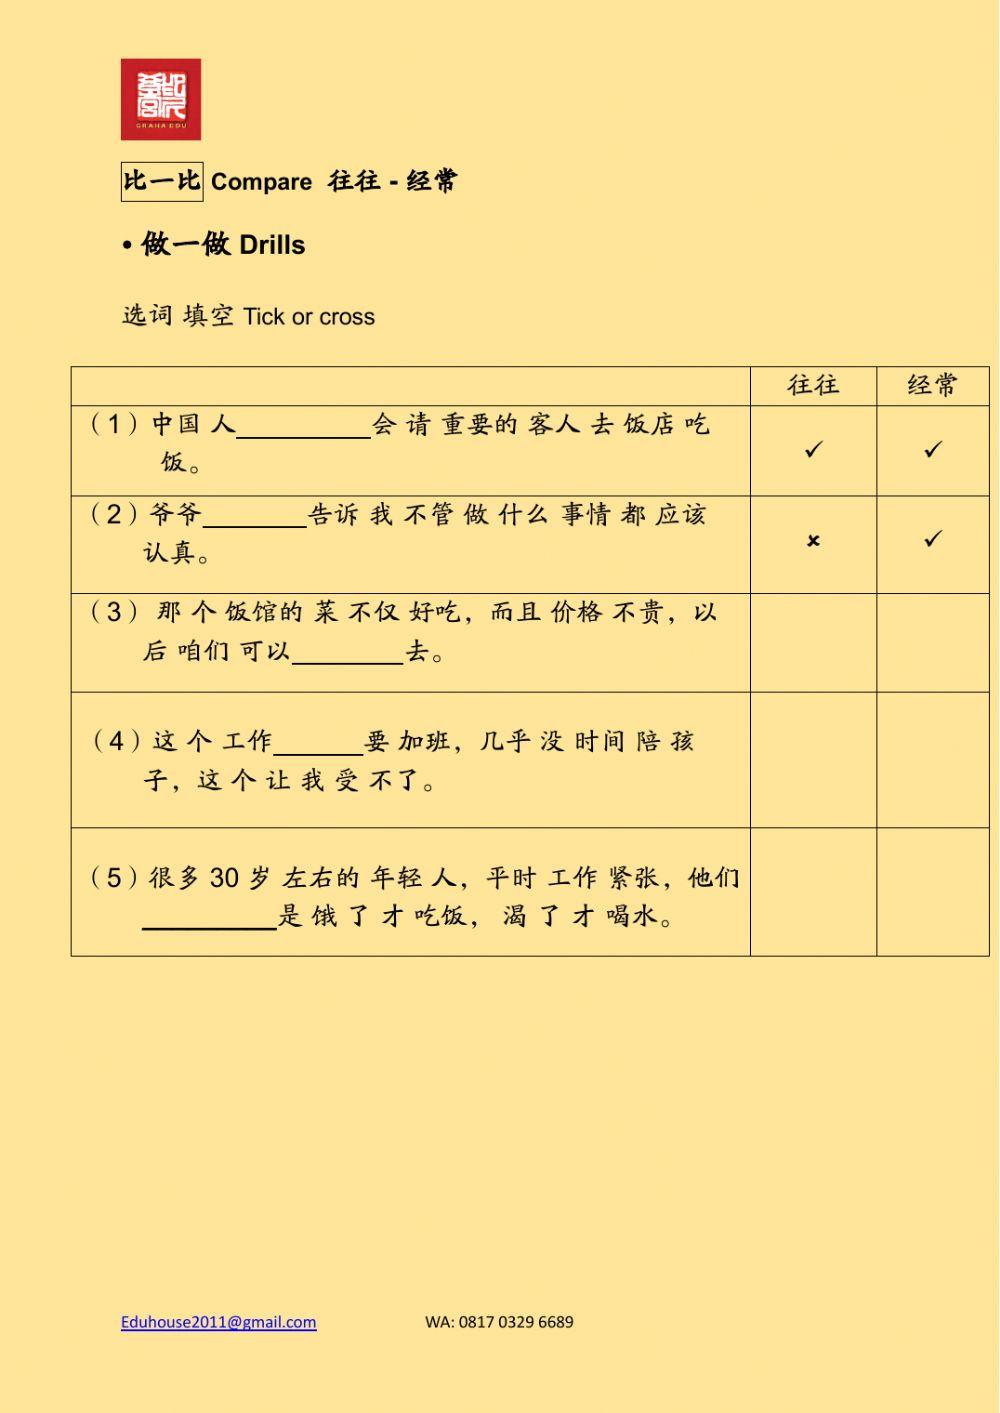 HSK 4A Textbook Unit 8 page 205 - 209